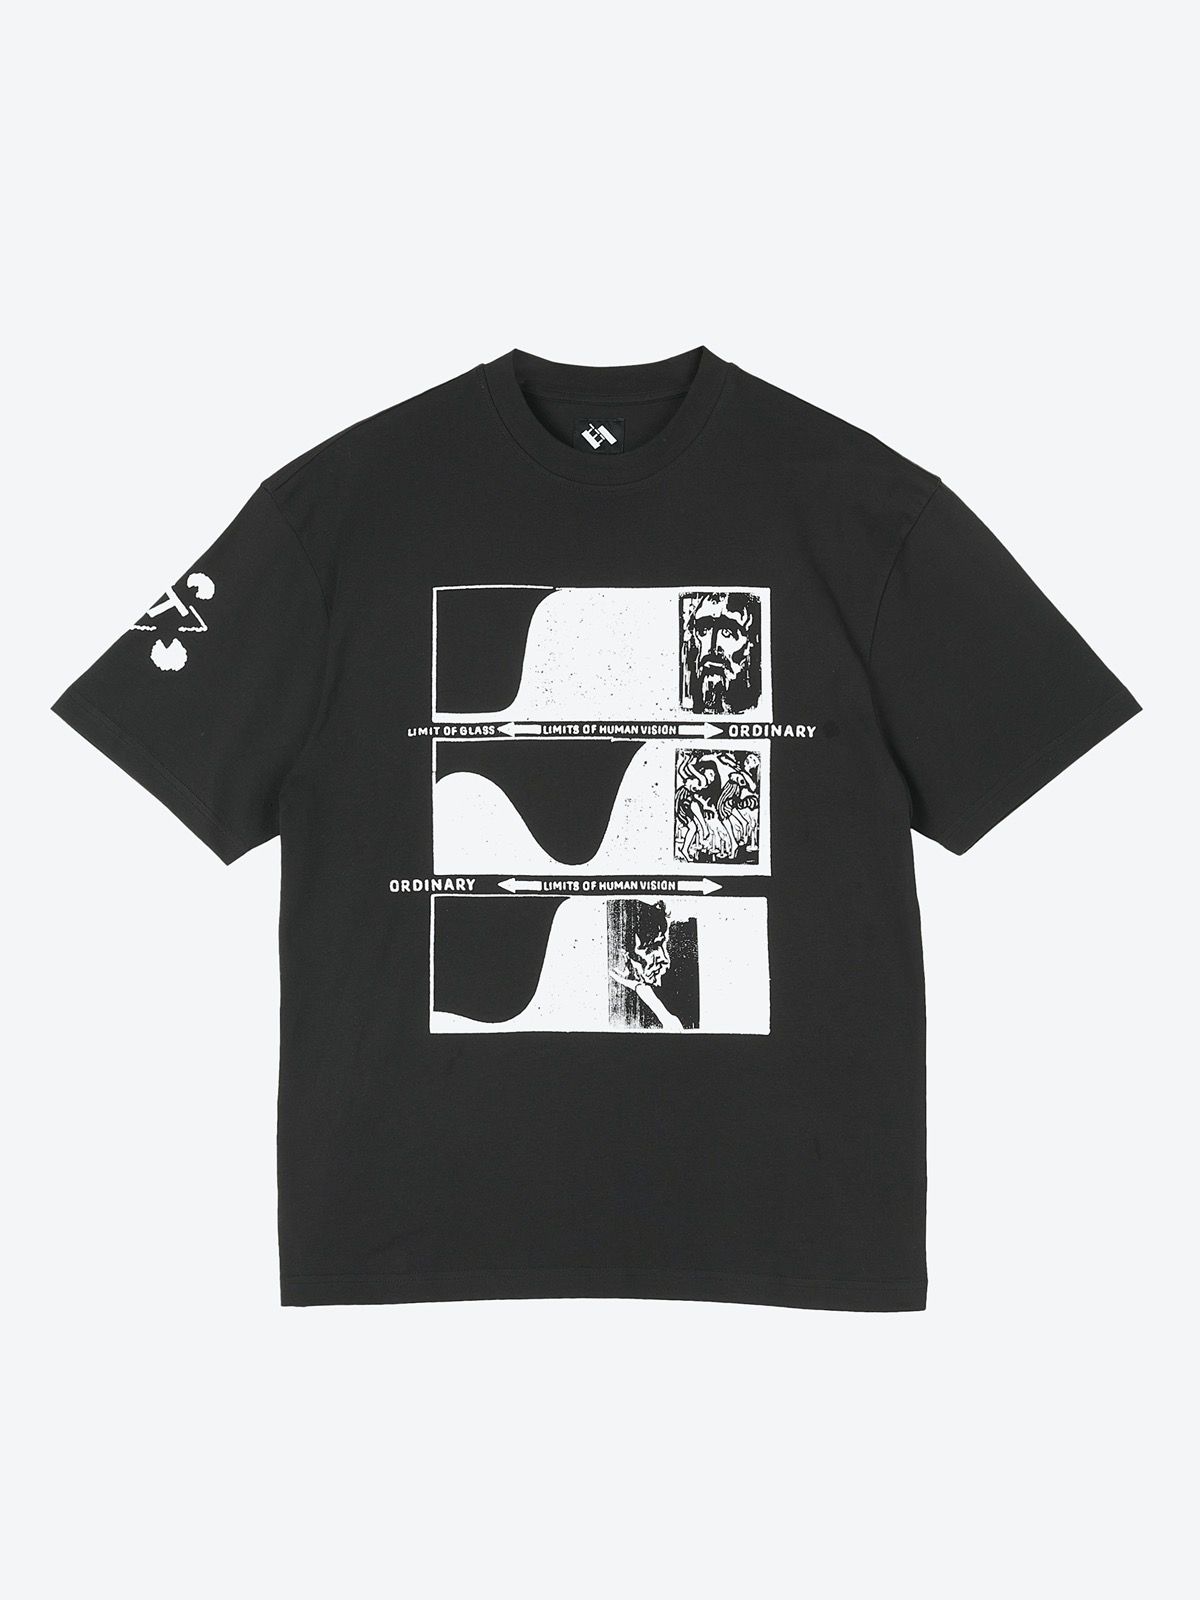 the trilogy tapes ttt | LIMITS OF HUMAN VISION T-SHIRT